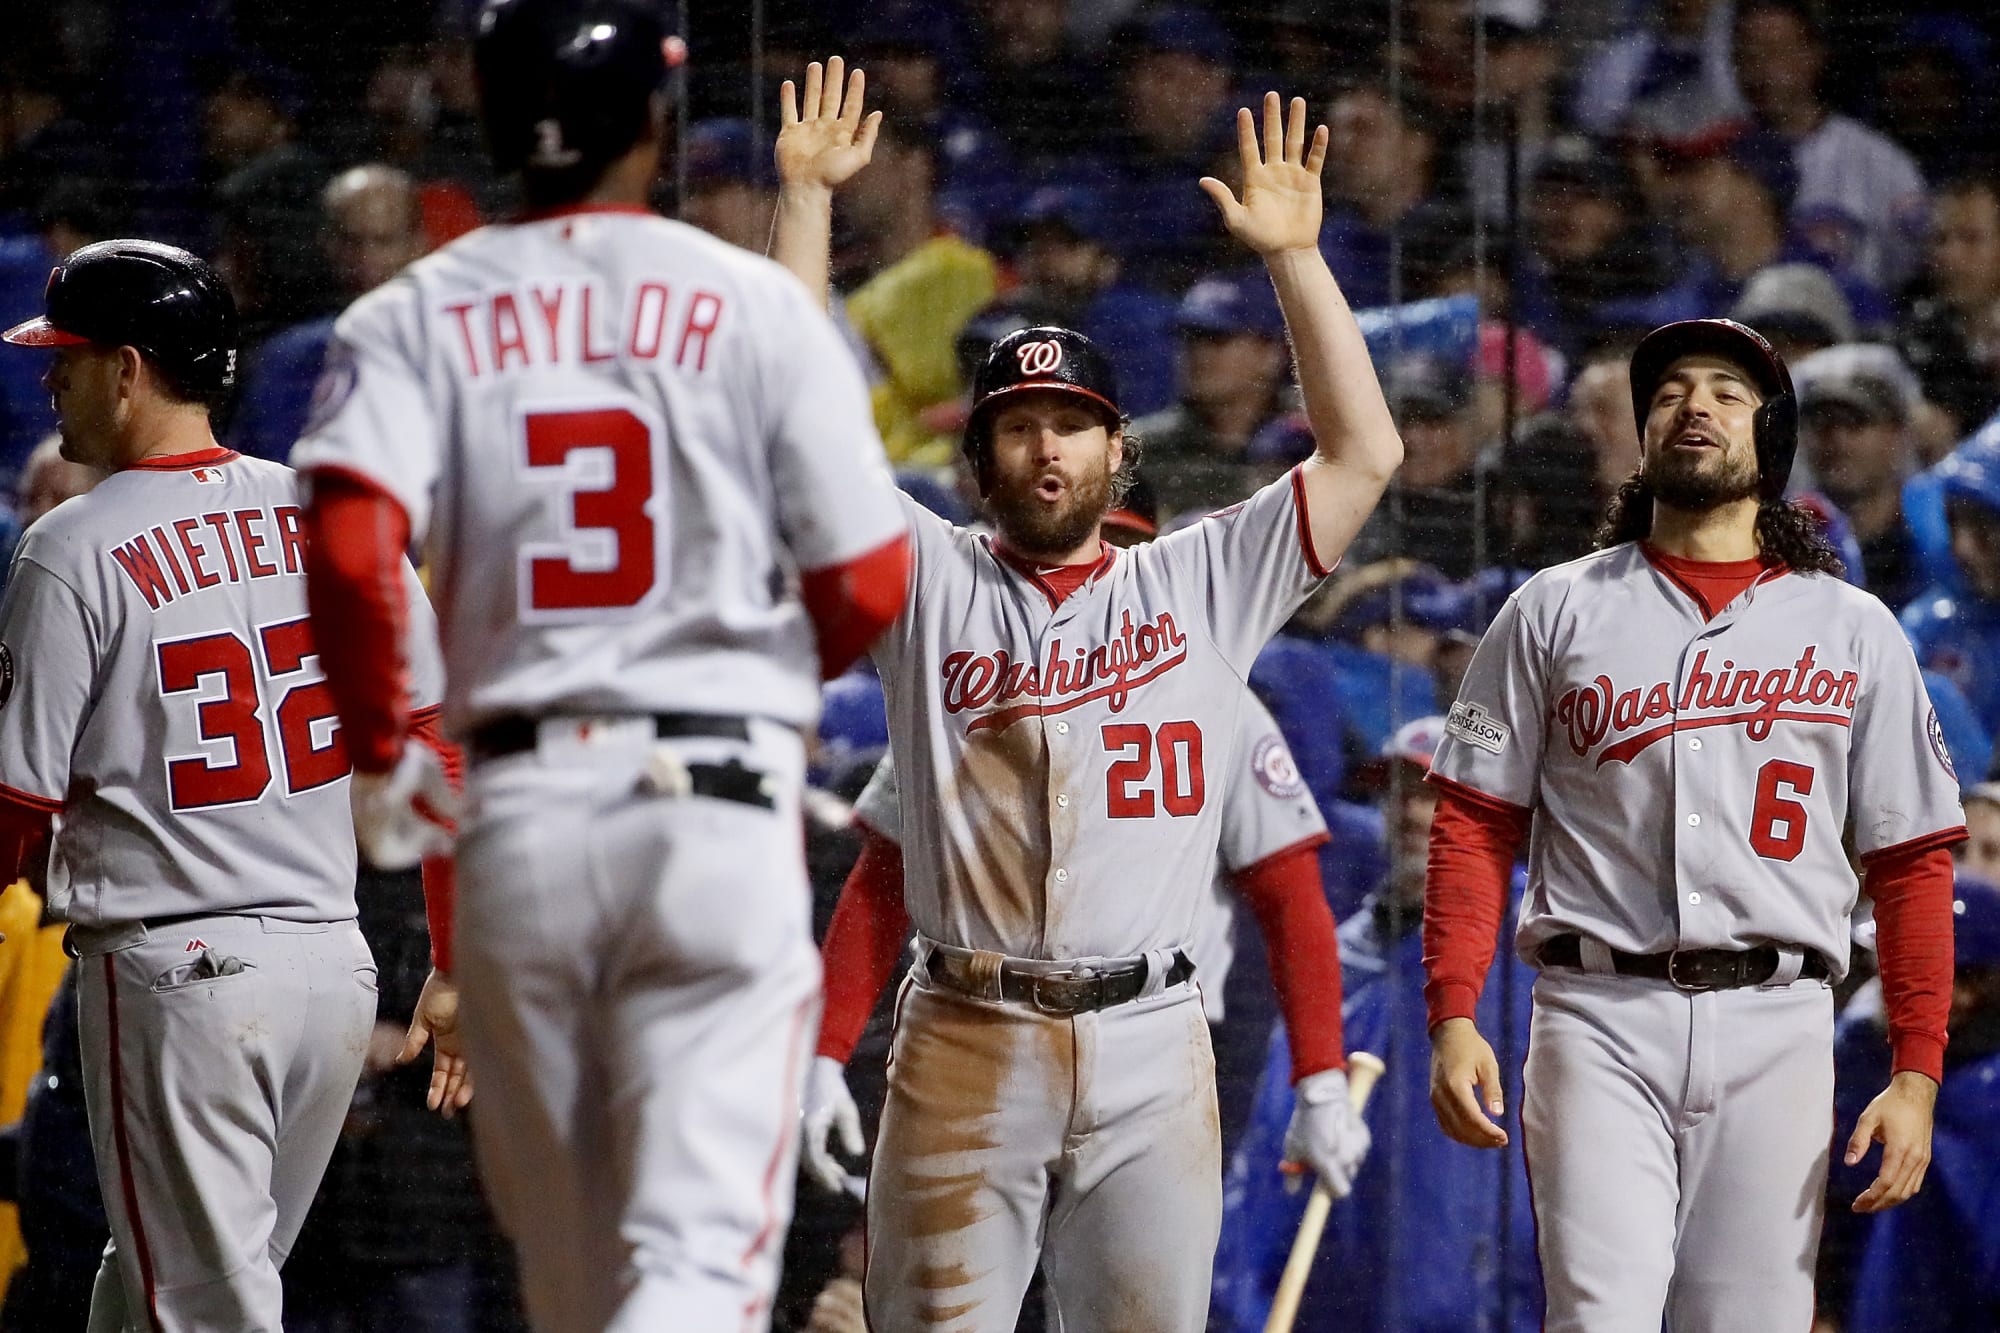 NLDS Game 4, Nationals vs. Cubs Highlights, recap and more